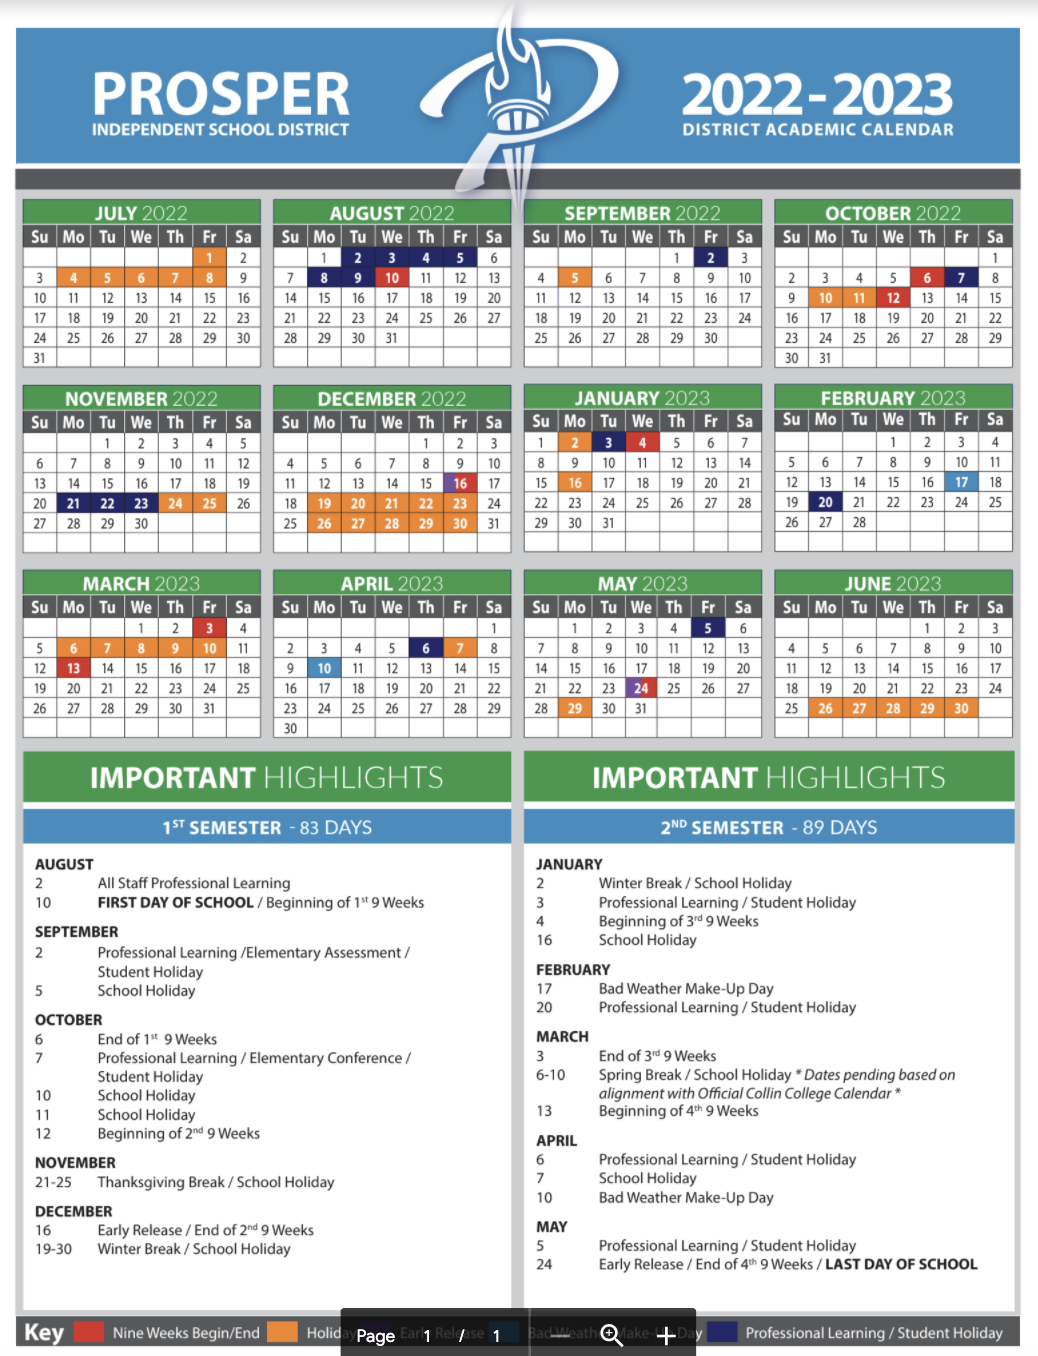 Plano Isd Calendar 2022 2023 Here Are Prosper Isd's School Calendars For The 2022-2023 And The 2023-2024  School Years | Cities | Checkoutdfw.com